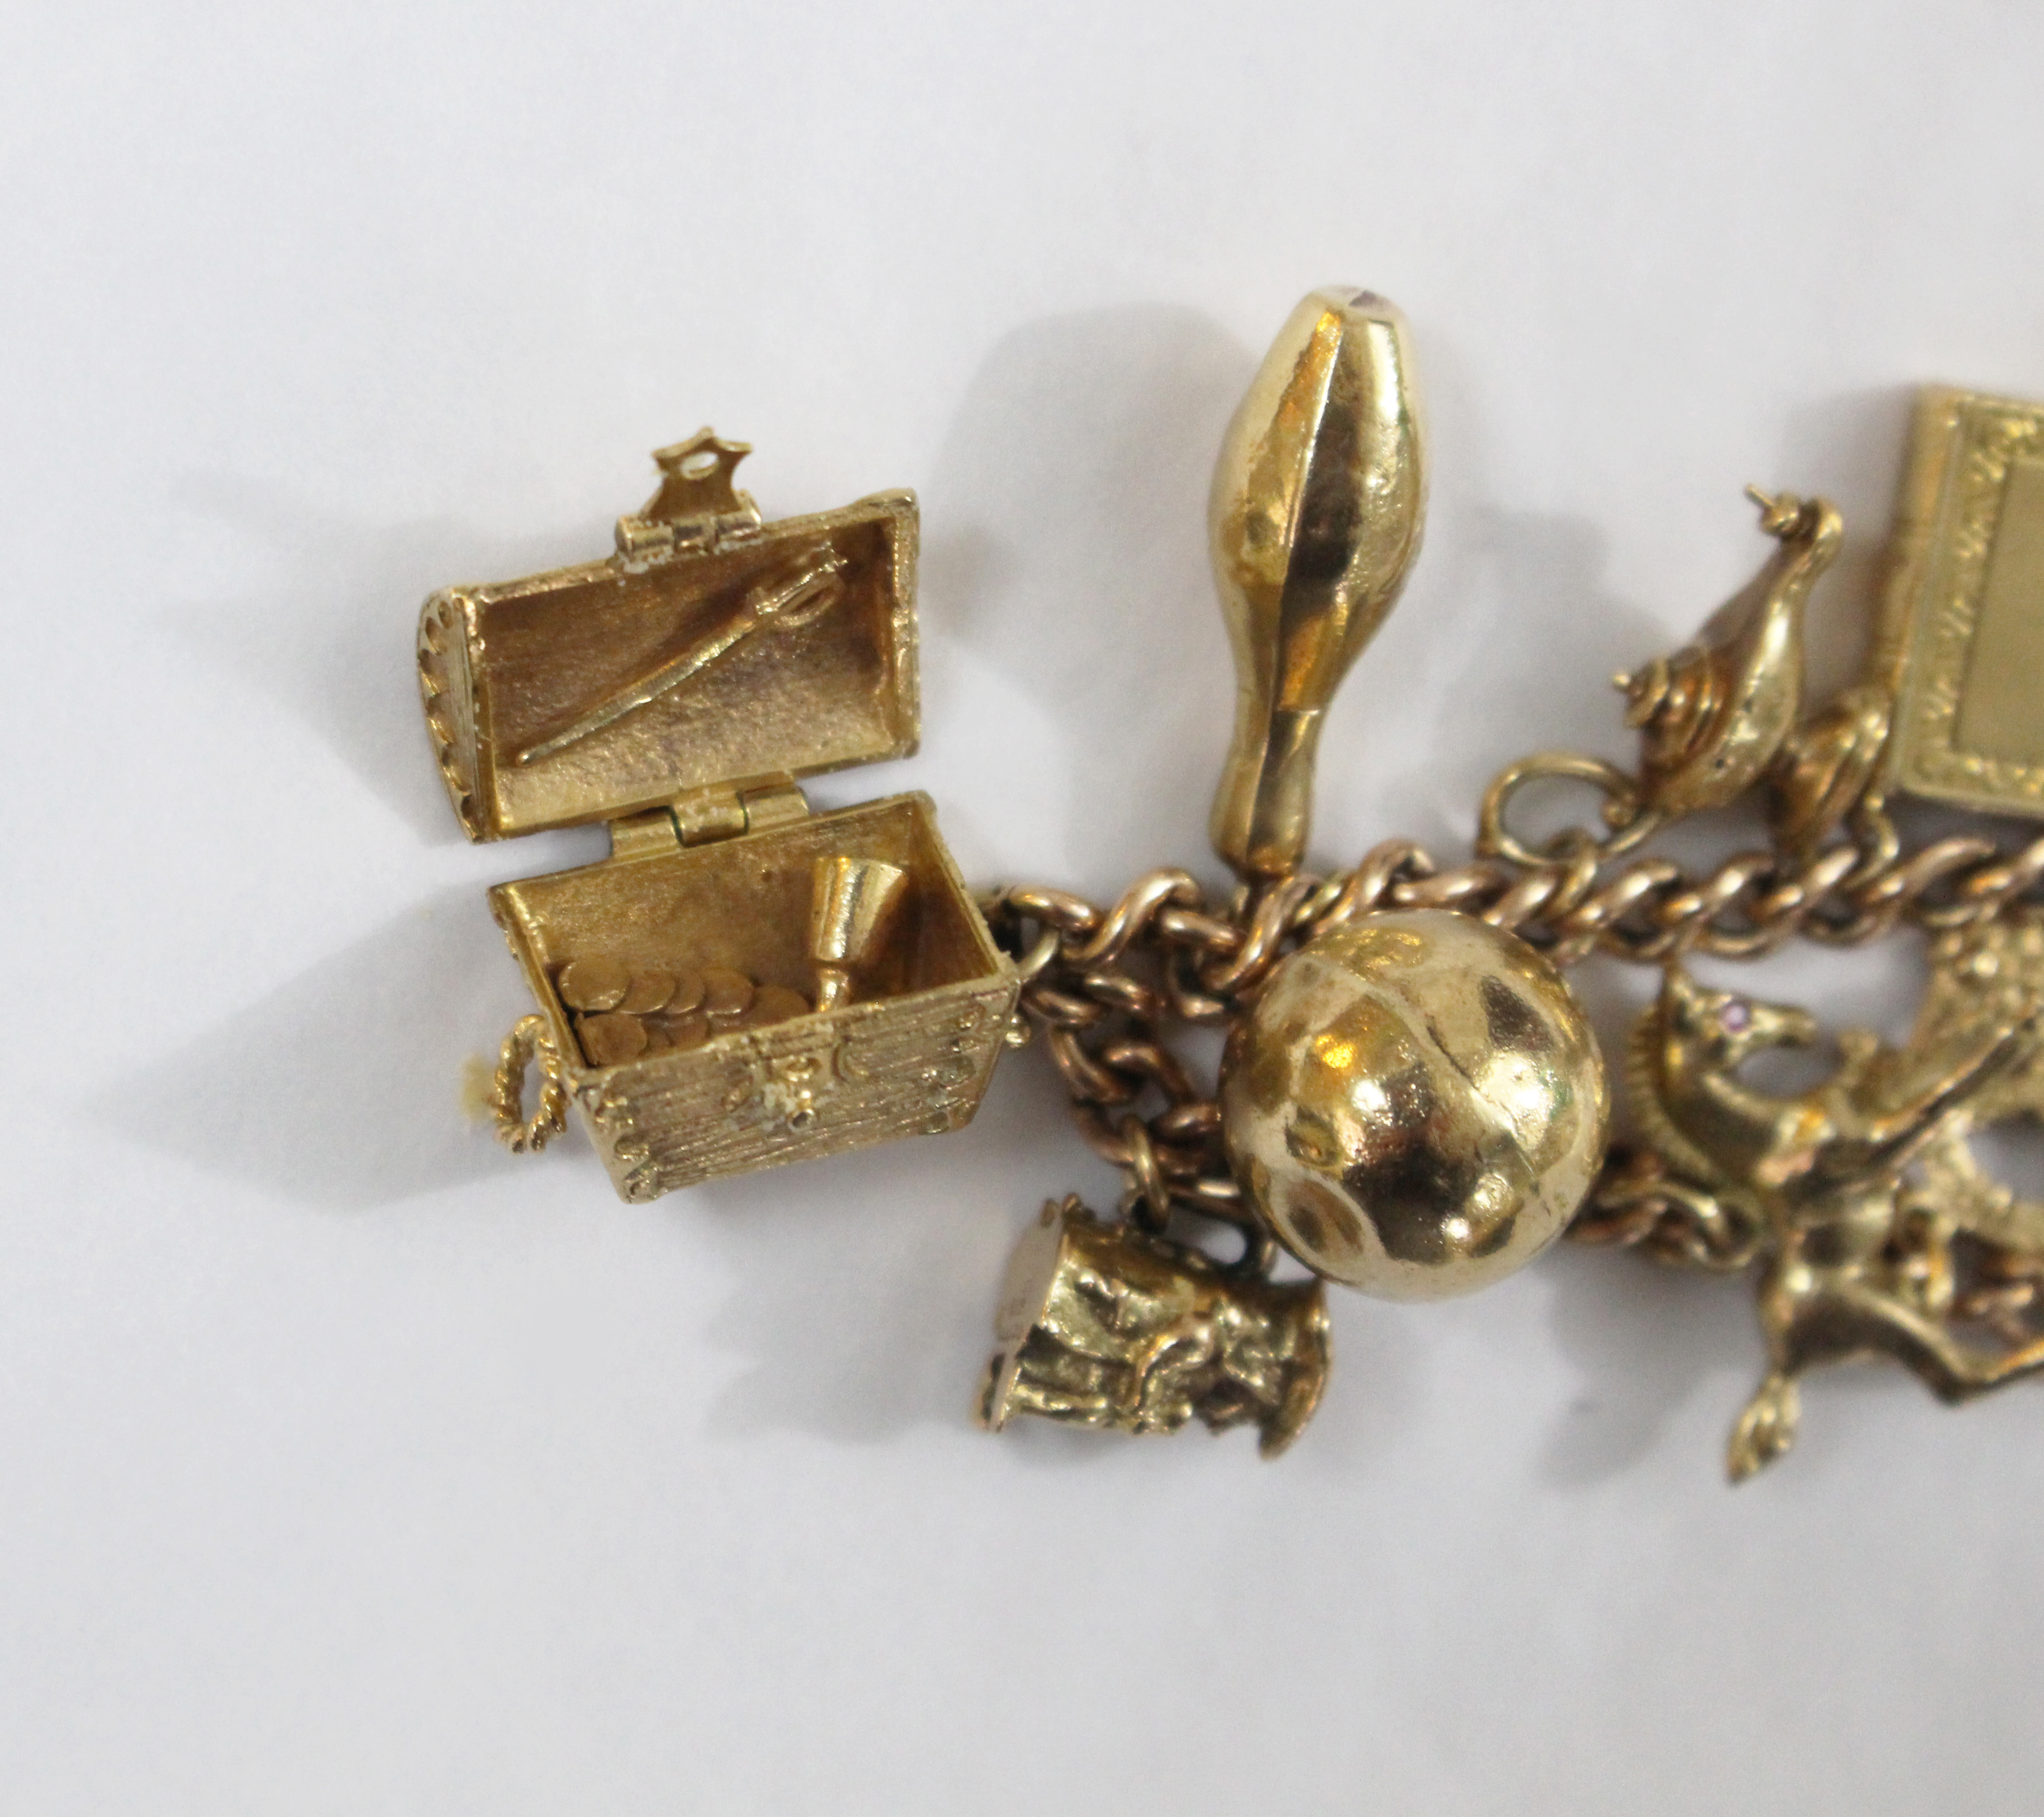 9ct Gold Vintage Charm Bracelet with 14 Charms - Image 6 of 10